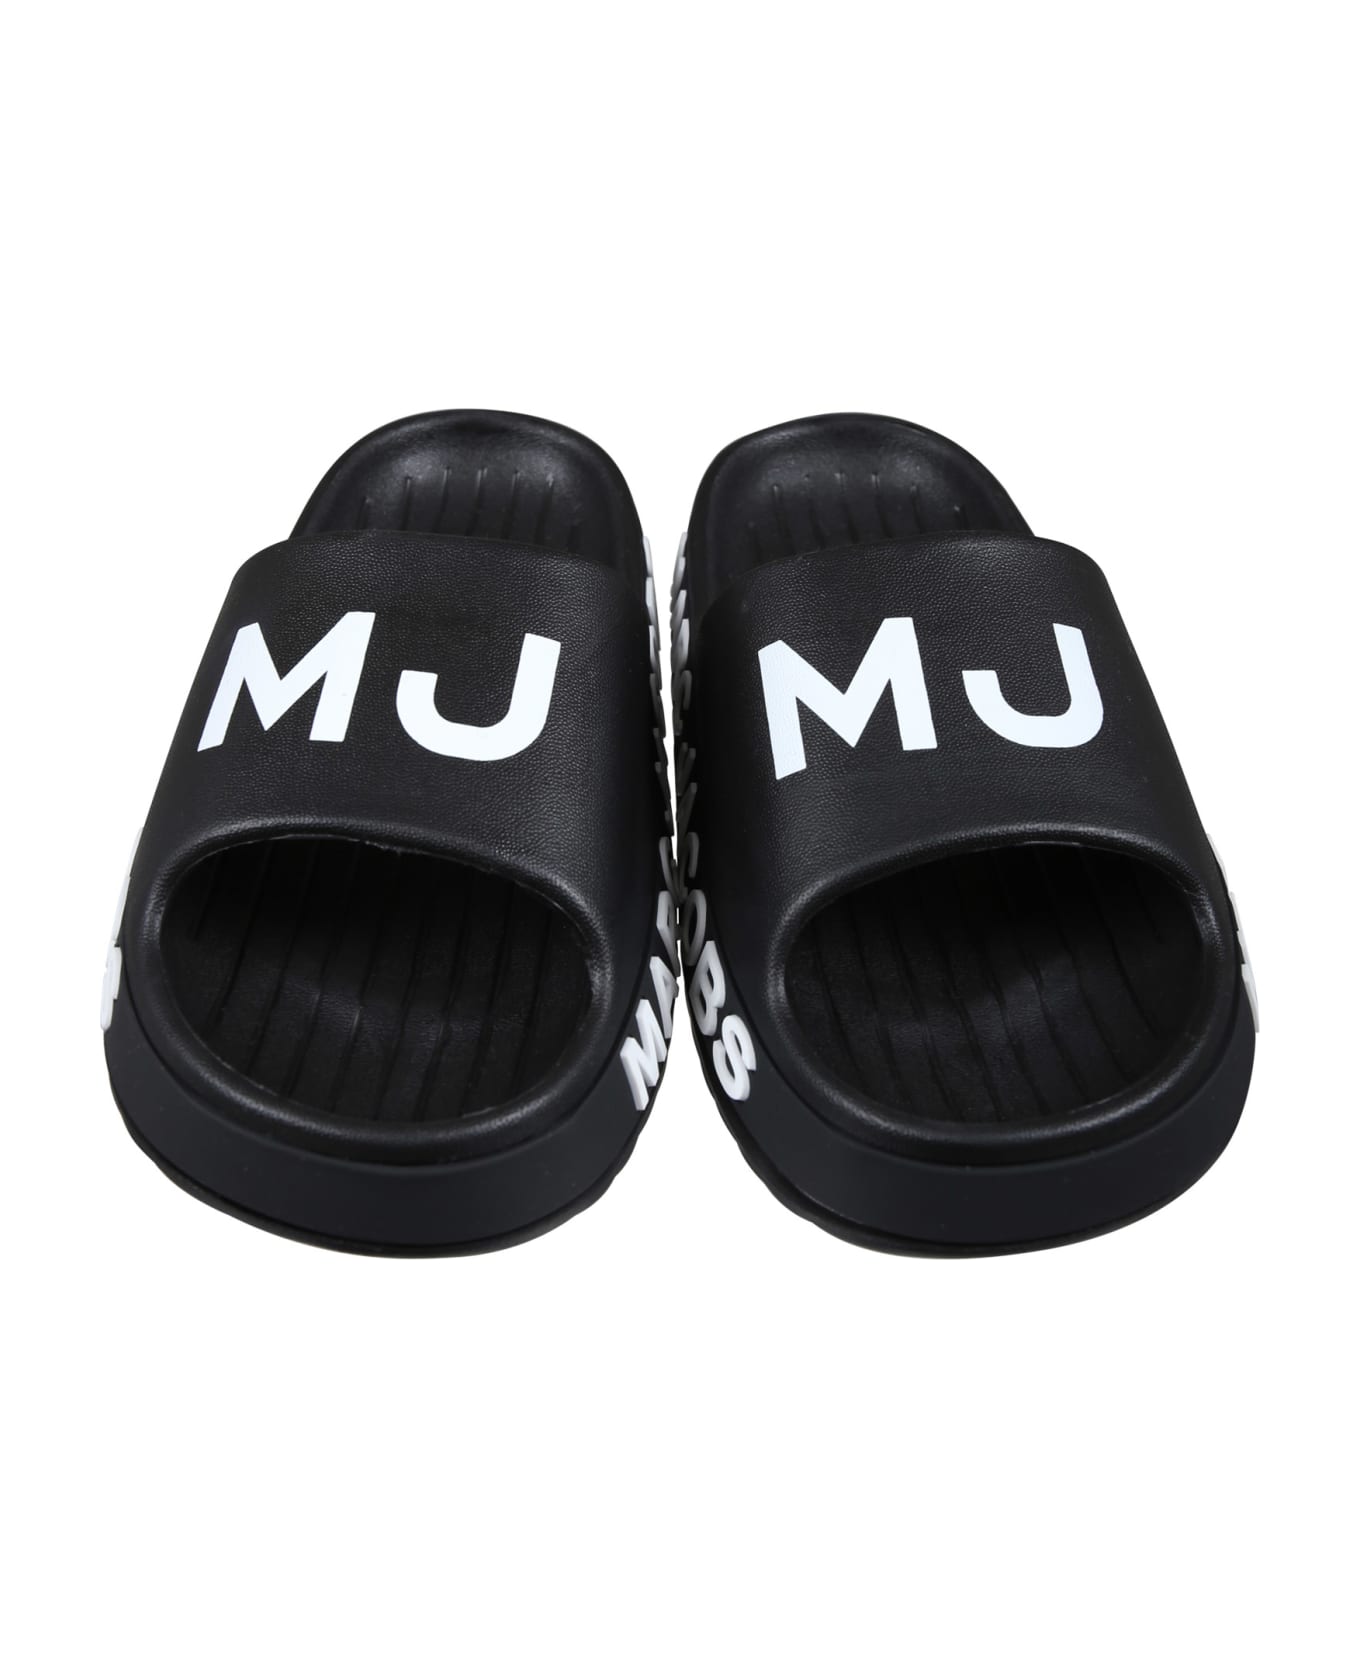 Little Marc Jacobs Black Slippers For Kids With Logo - Nero